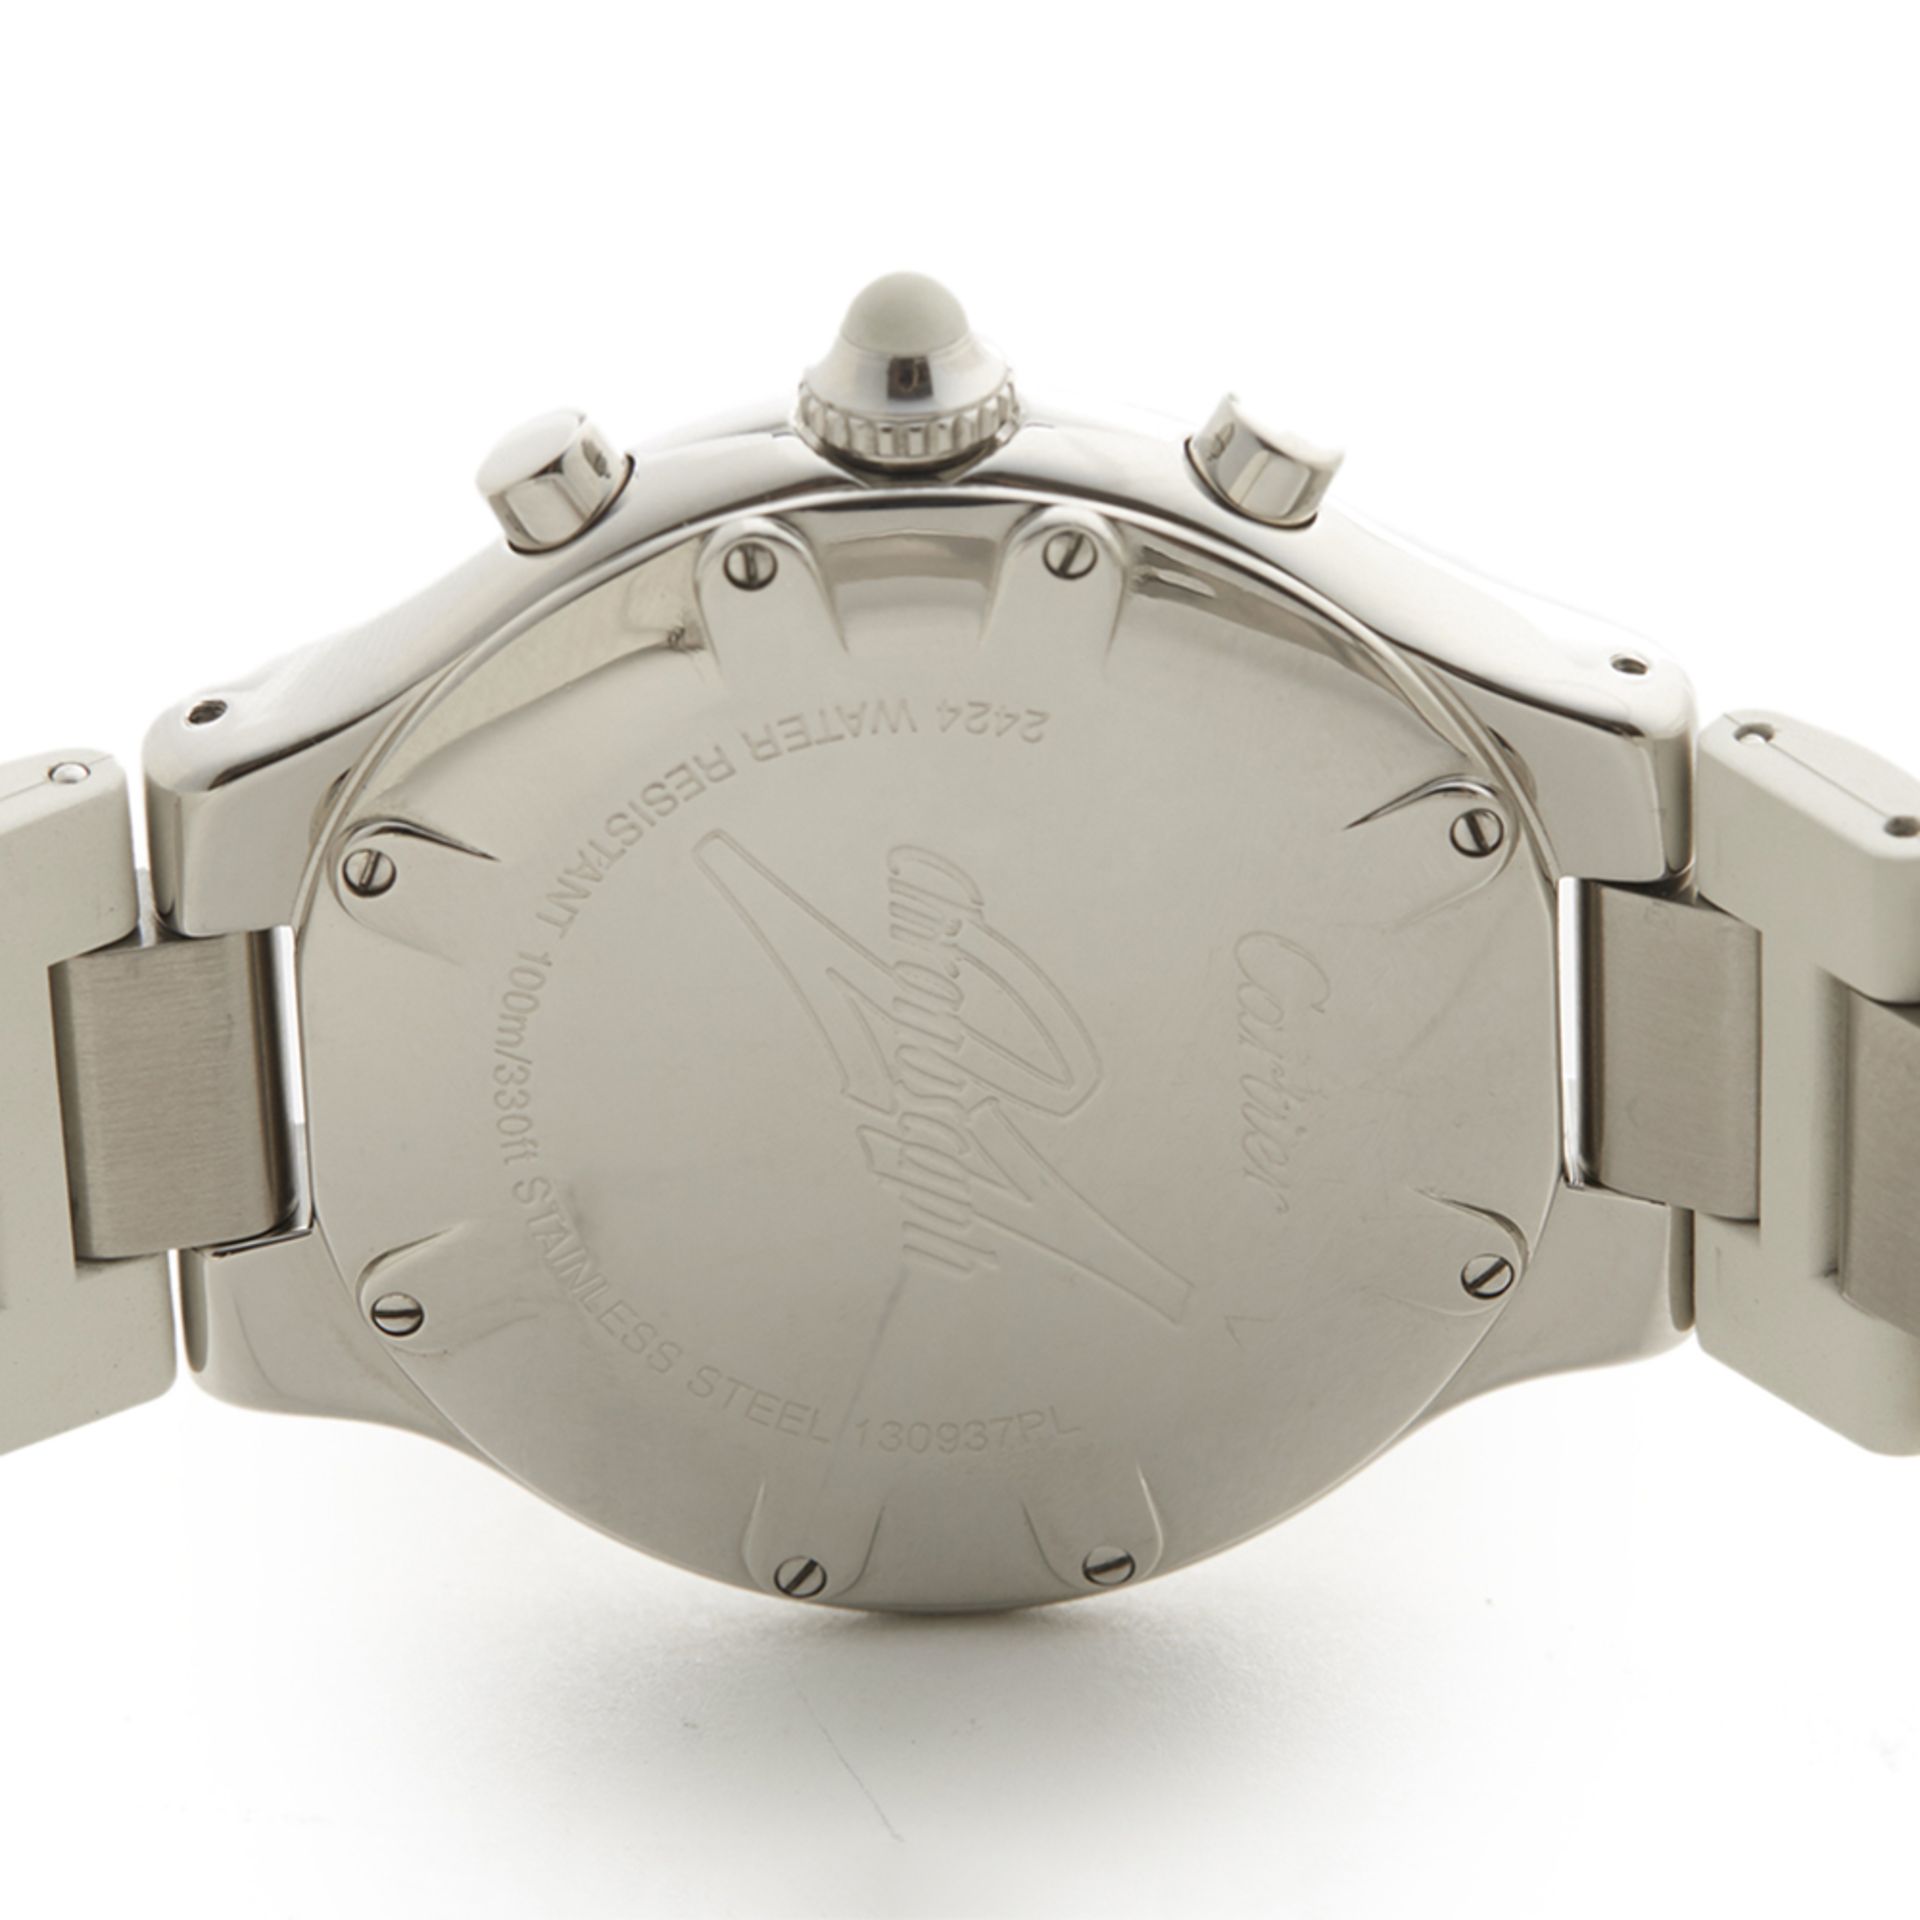 Cartier Must de 21 Chronoscaph 38mm Stainless Steel - 2424 or W10184U2 - Image 8 of 8